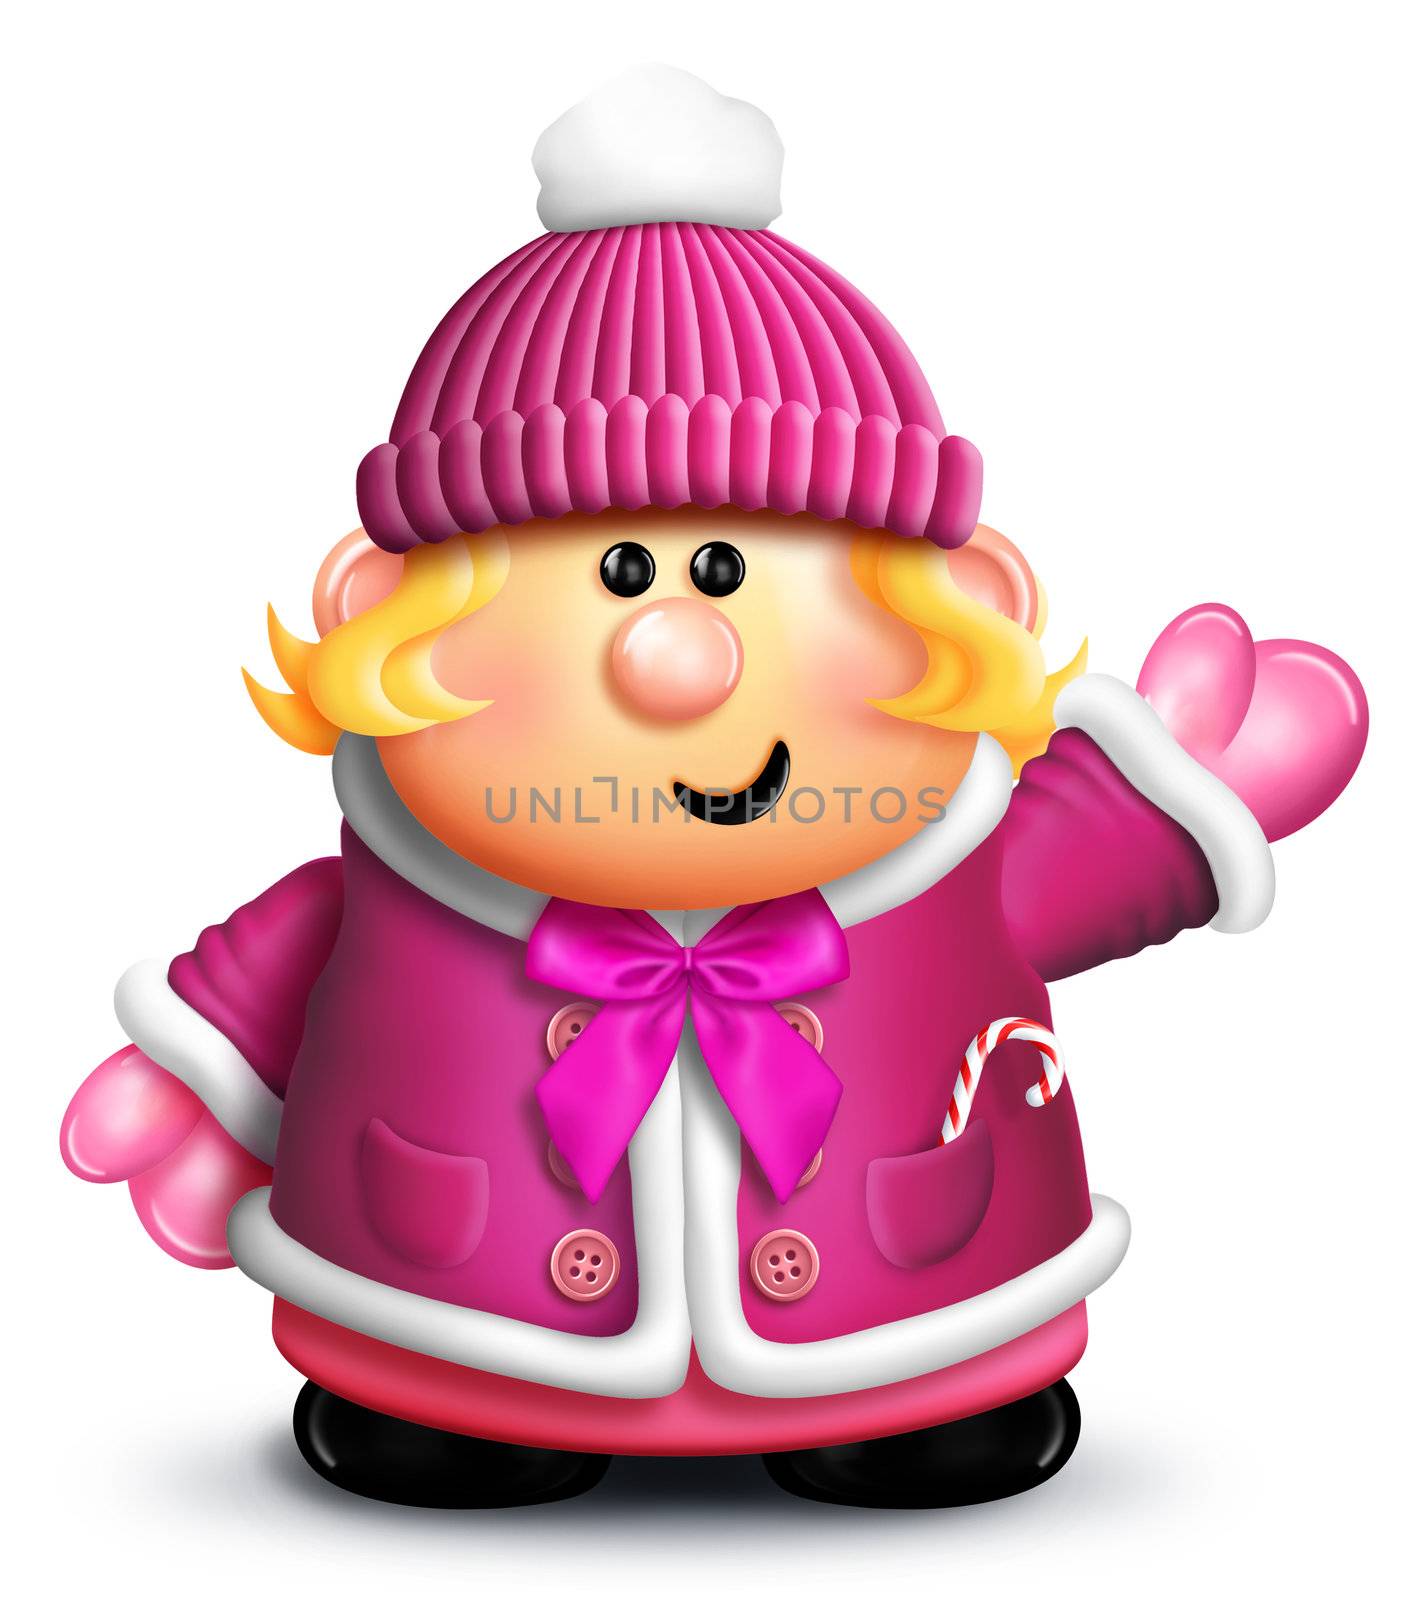 Whimsical Cartoon Girl in Winter Clothing by komodoempire